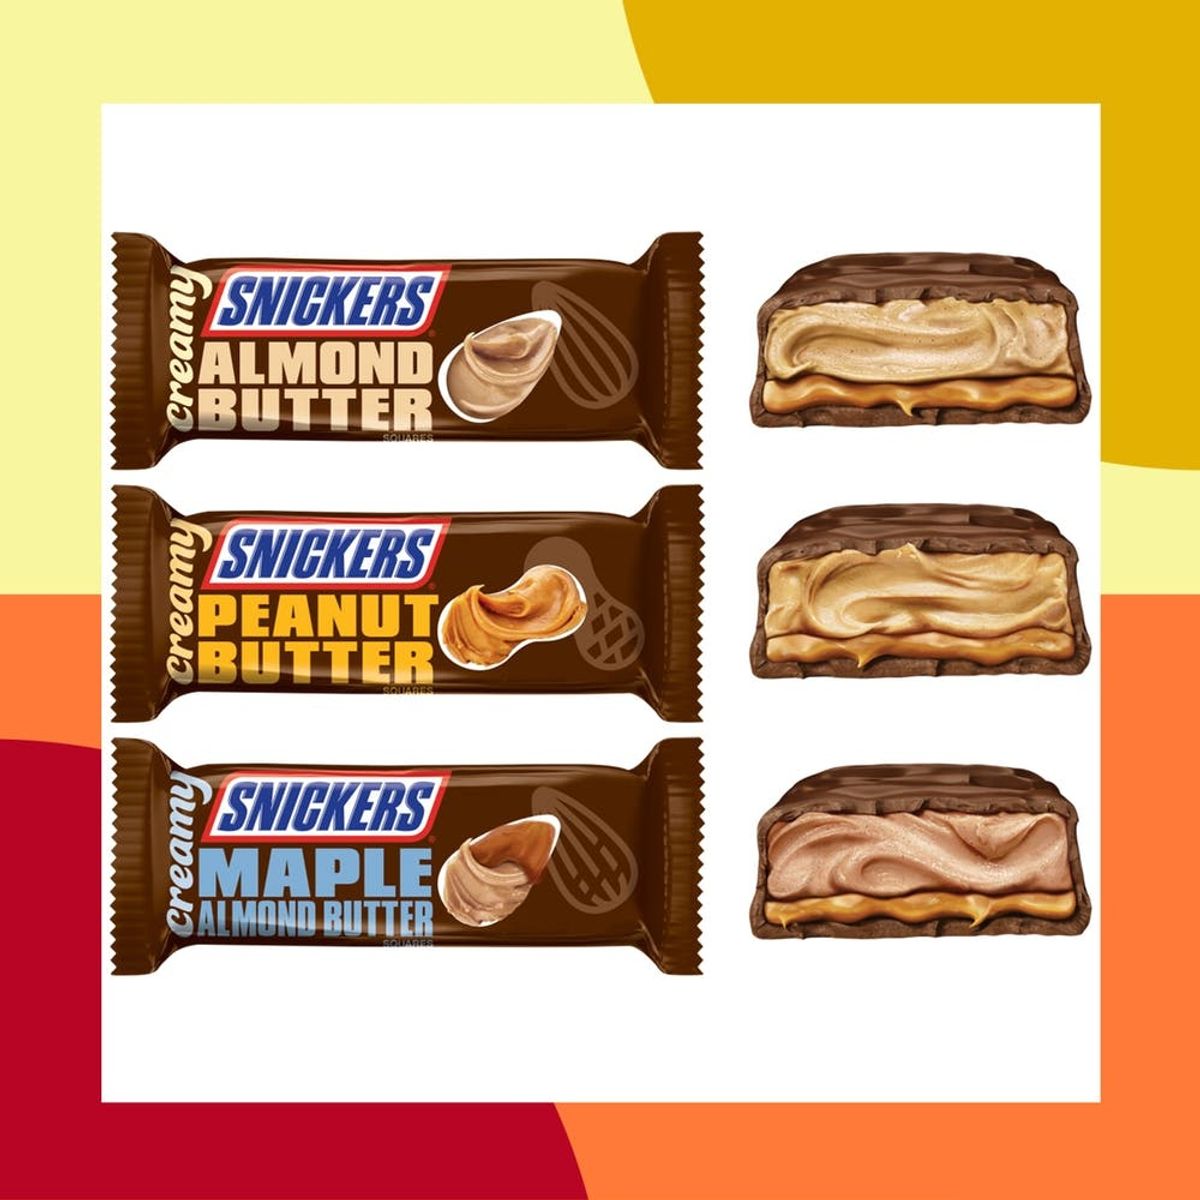 Snickers Goes Smooth With Its New “Creamy” Bars Filled With Nut Butters